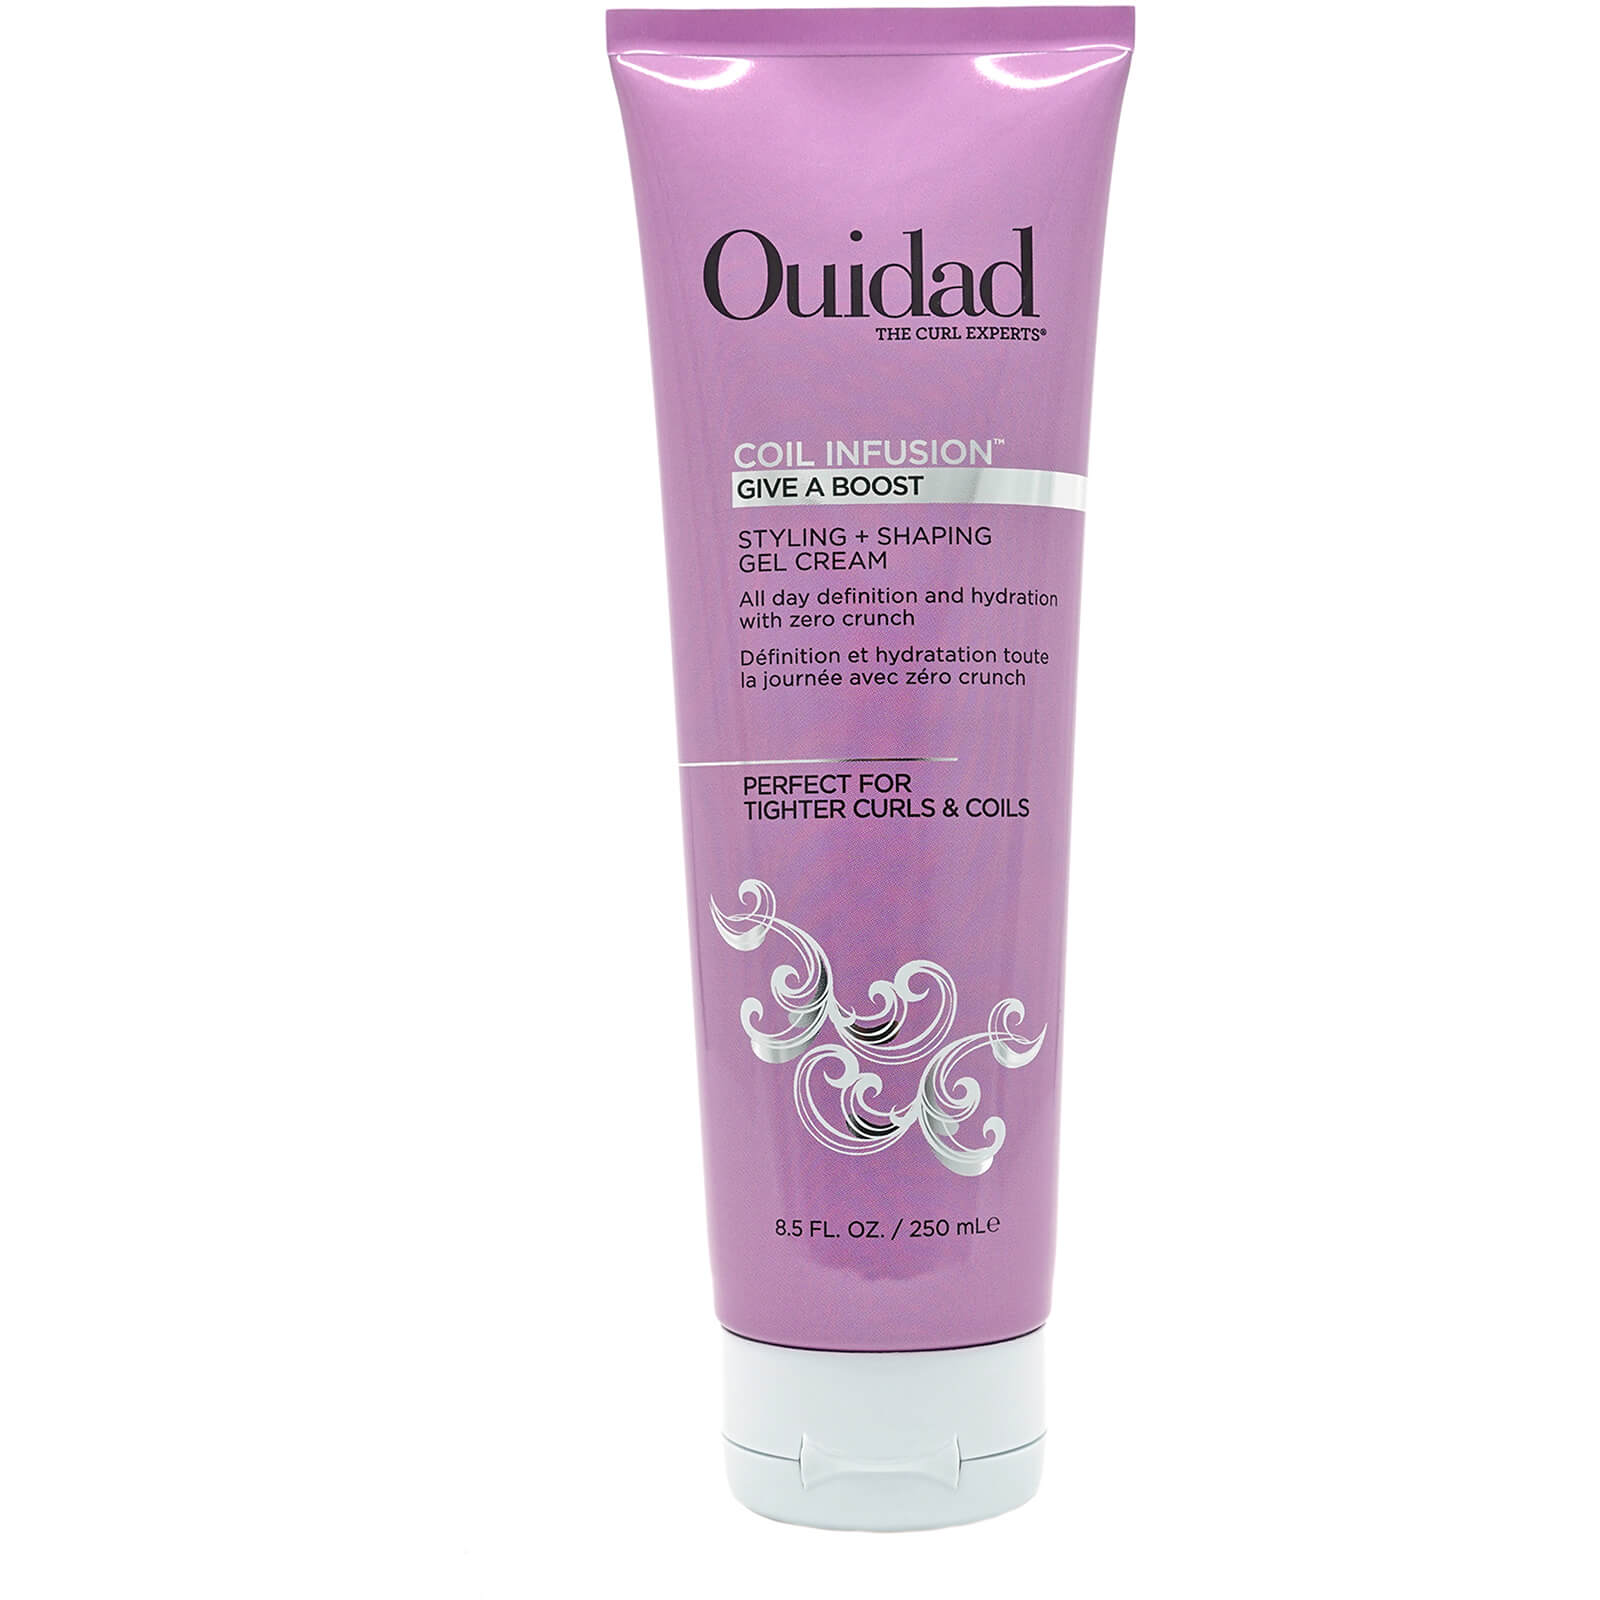 Ouidad Coil Infusion Give A Boost Styling And Shaping Gel Cream 8.5 oz